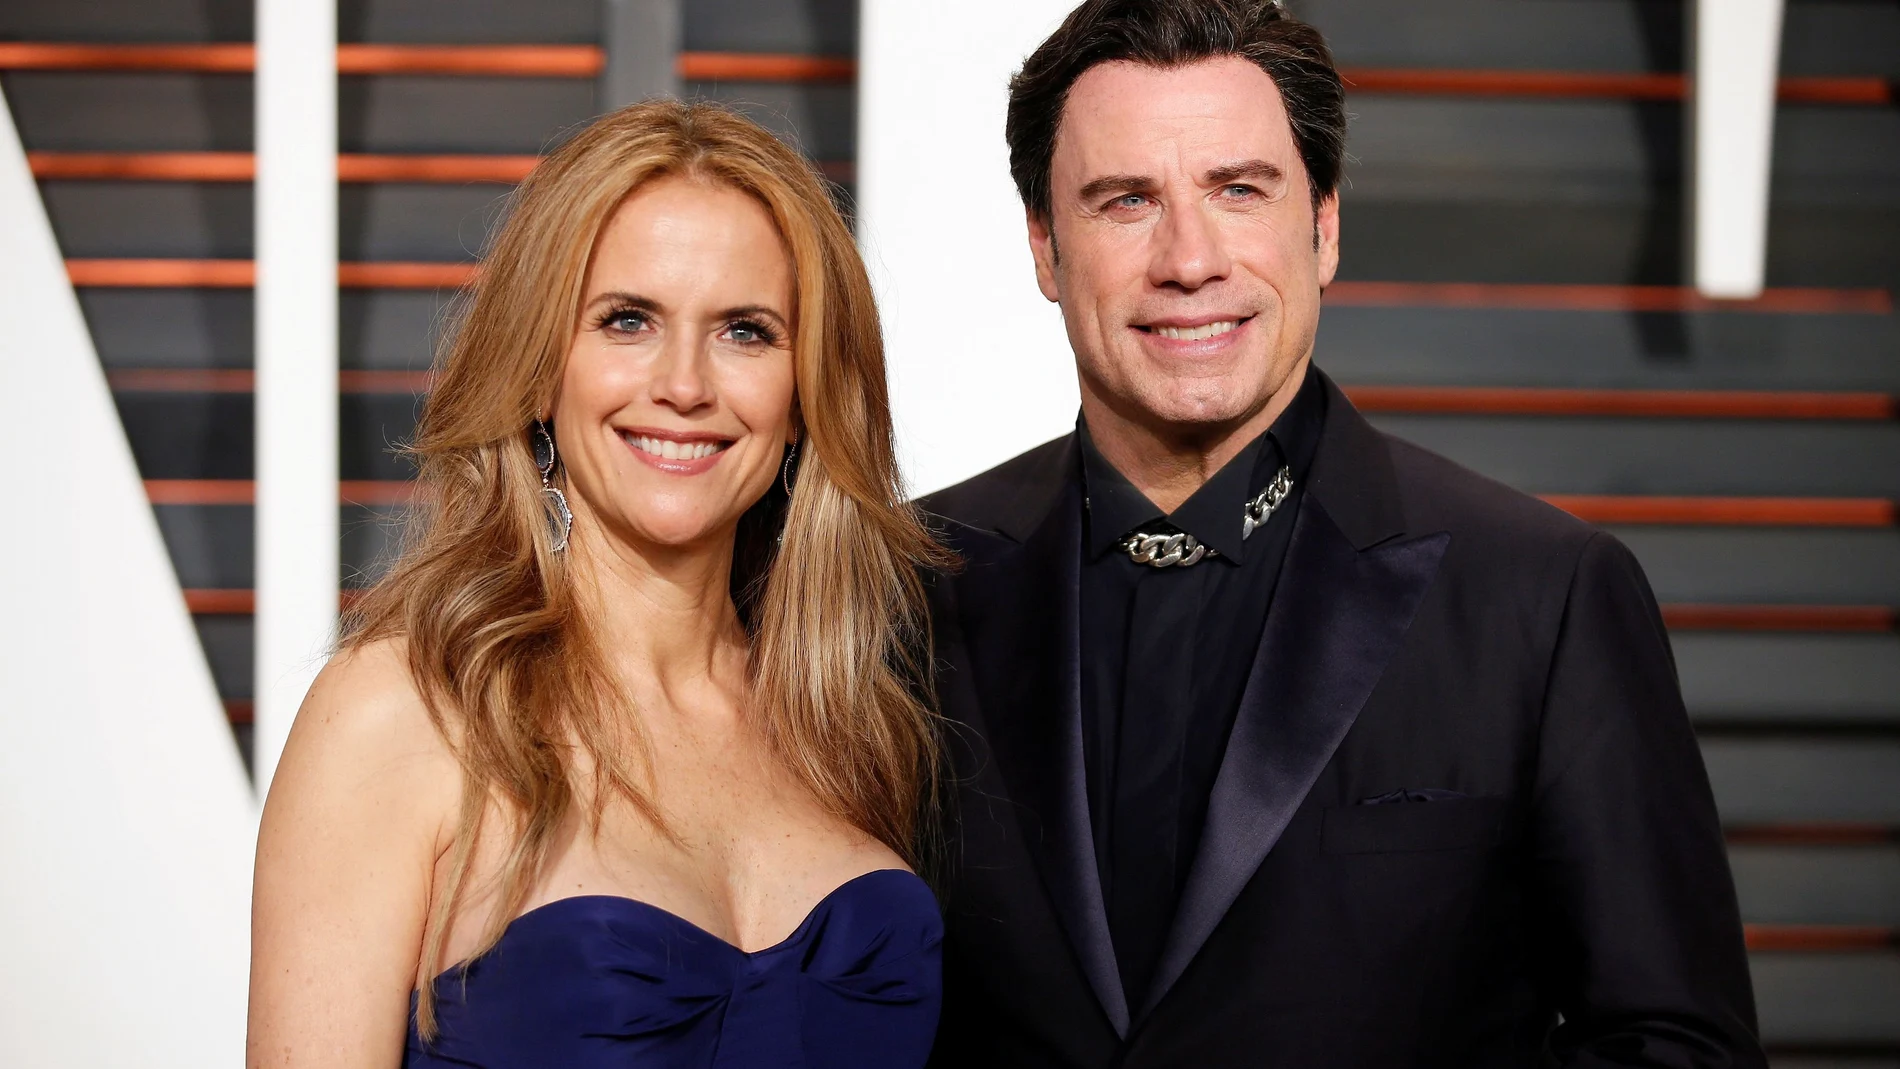 FILE PHOTO: Kelly Preston and John Travolta arrive at the 2015 Vanity Fair Oscar Party in Beverly Hills